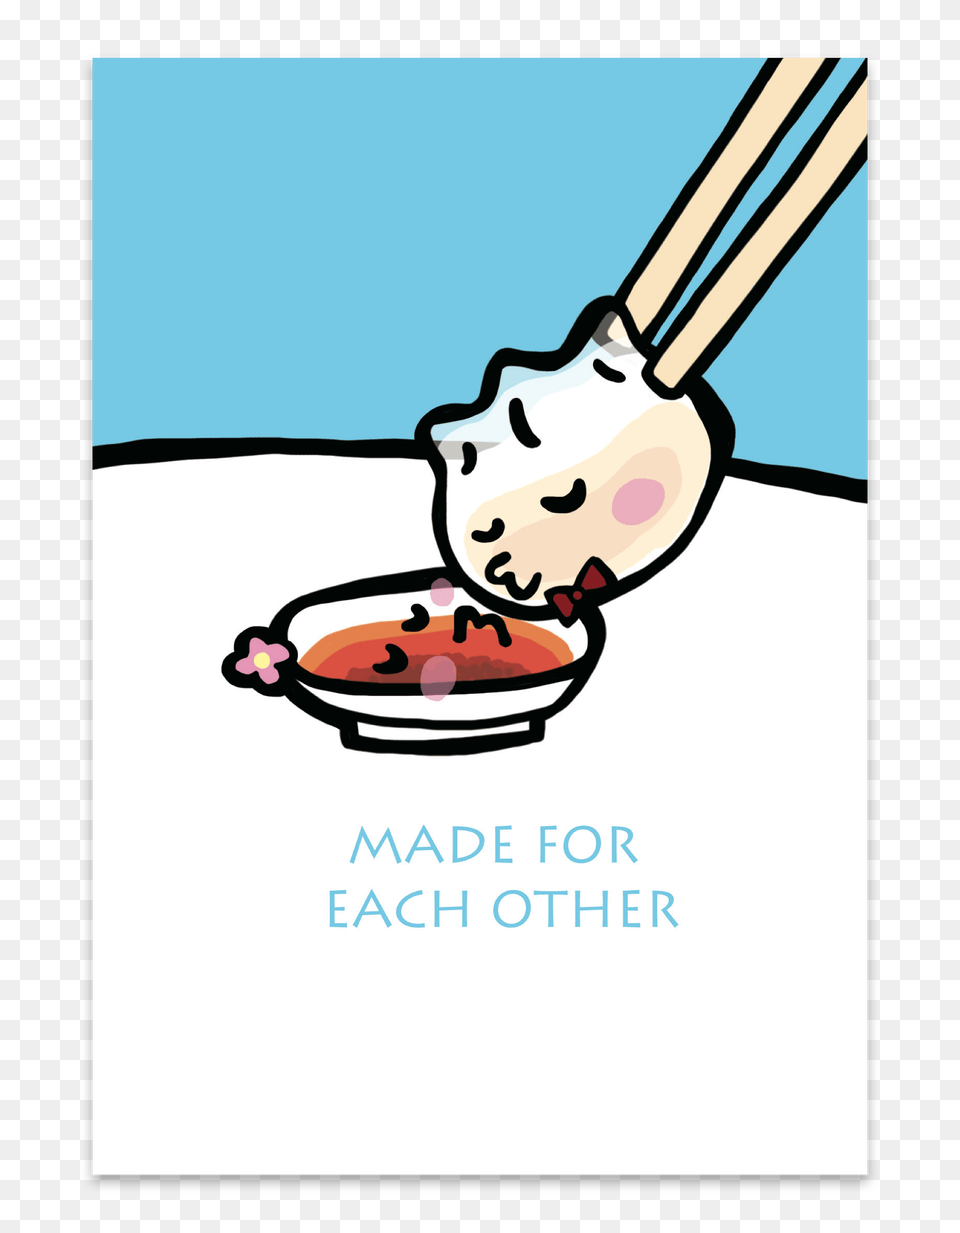 Made For Each Other, Cream, Cutlery, Dessert, Spoon Png